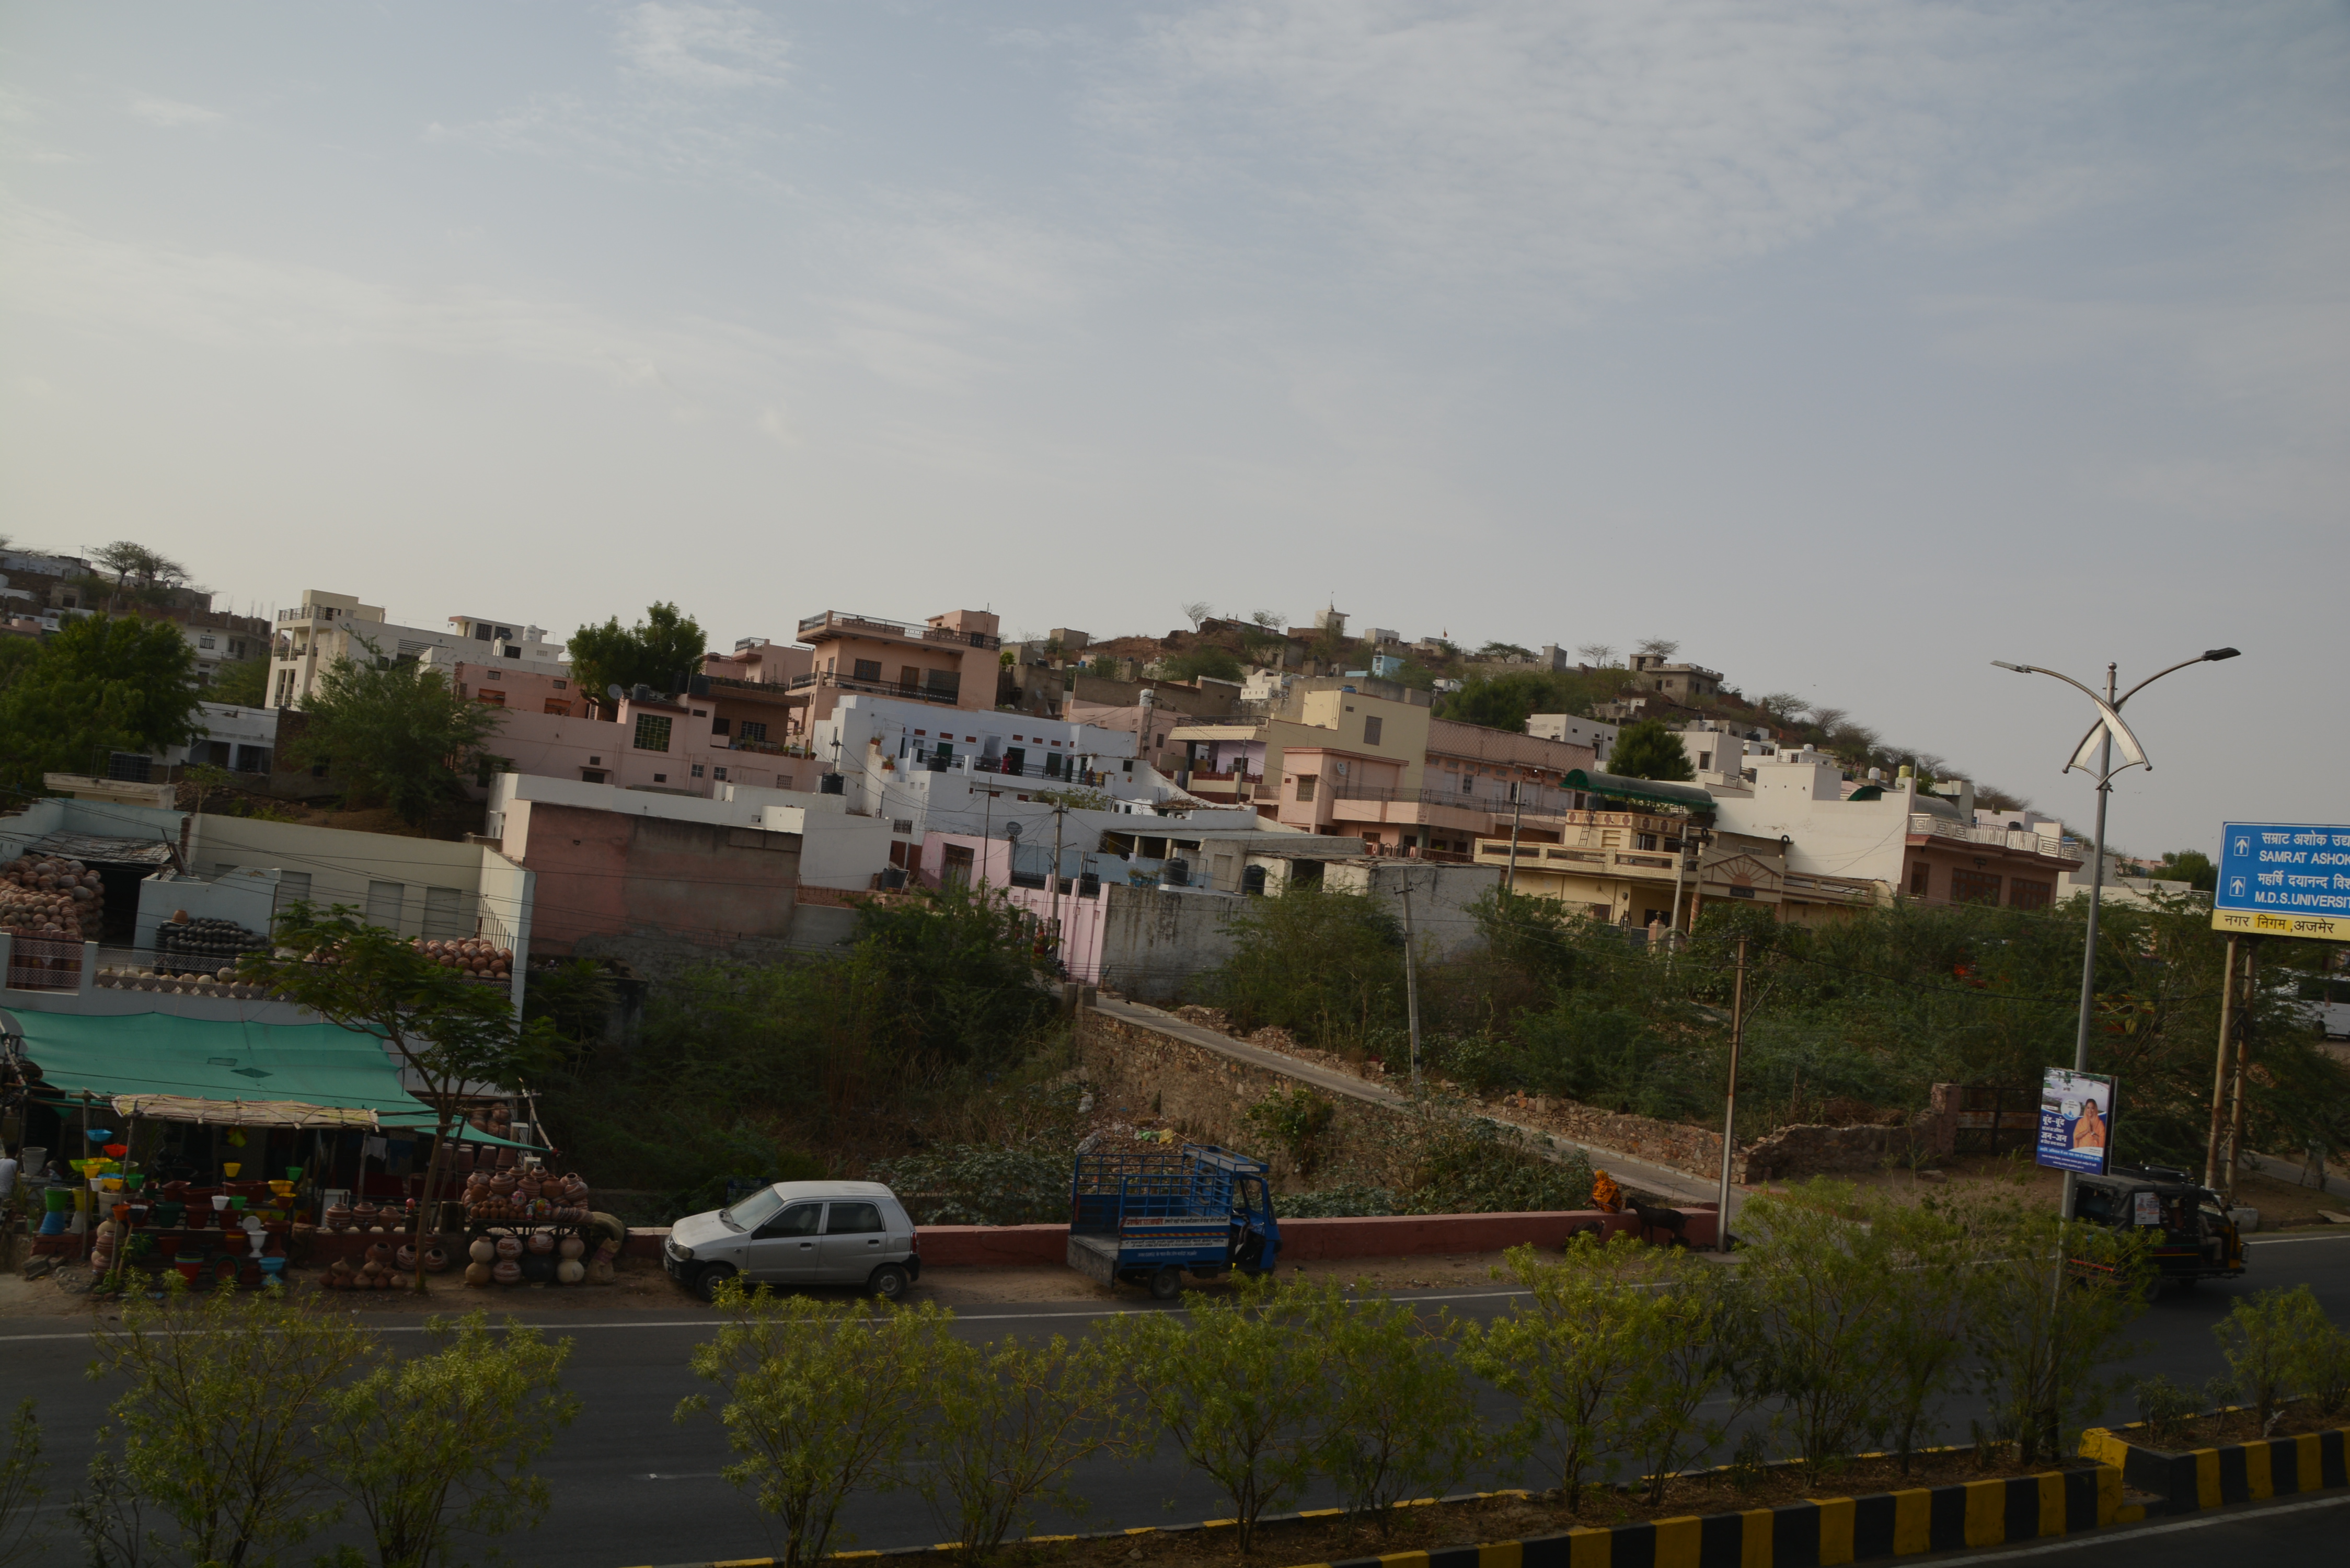 Illegal occupation of the hills of Aravali